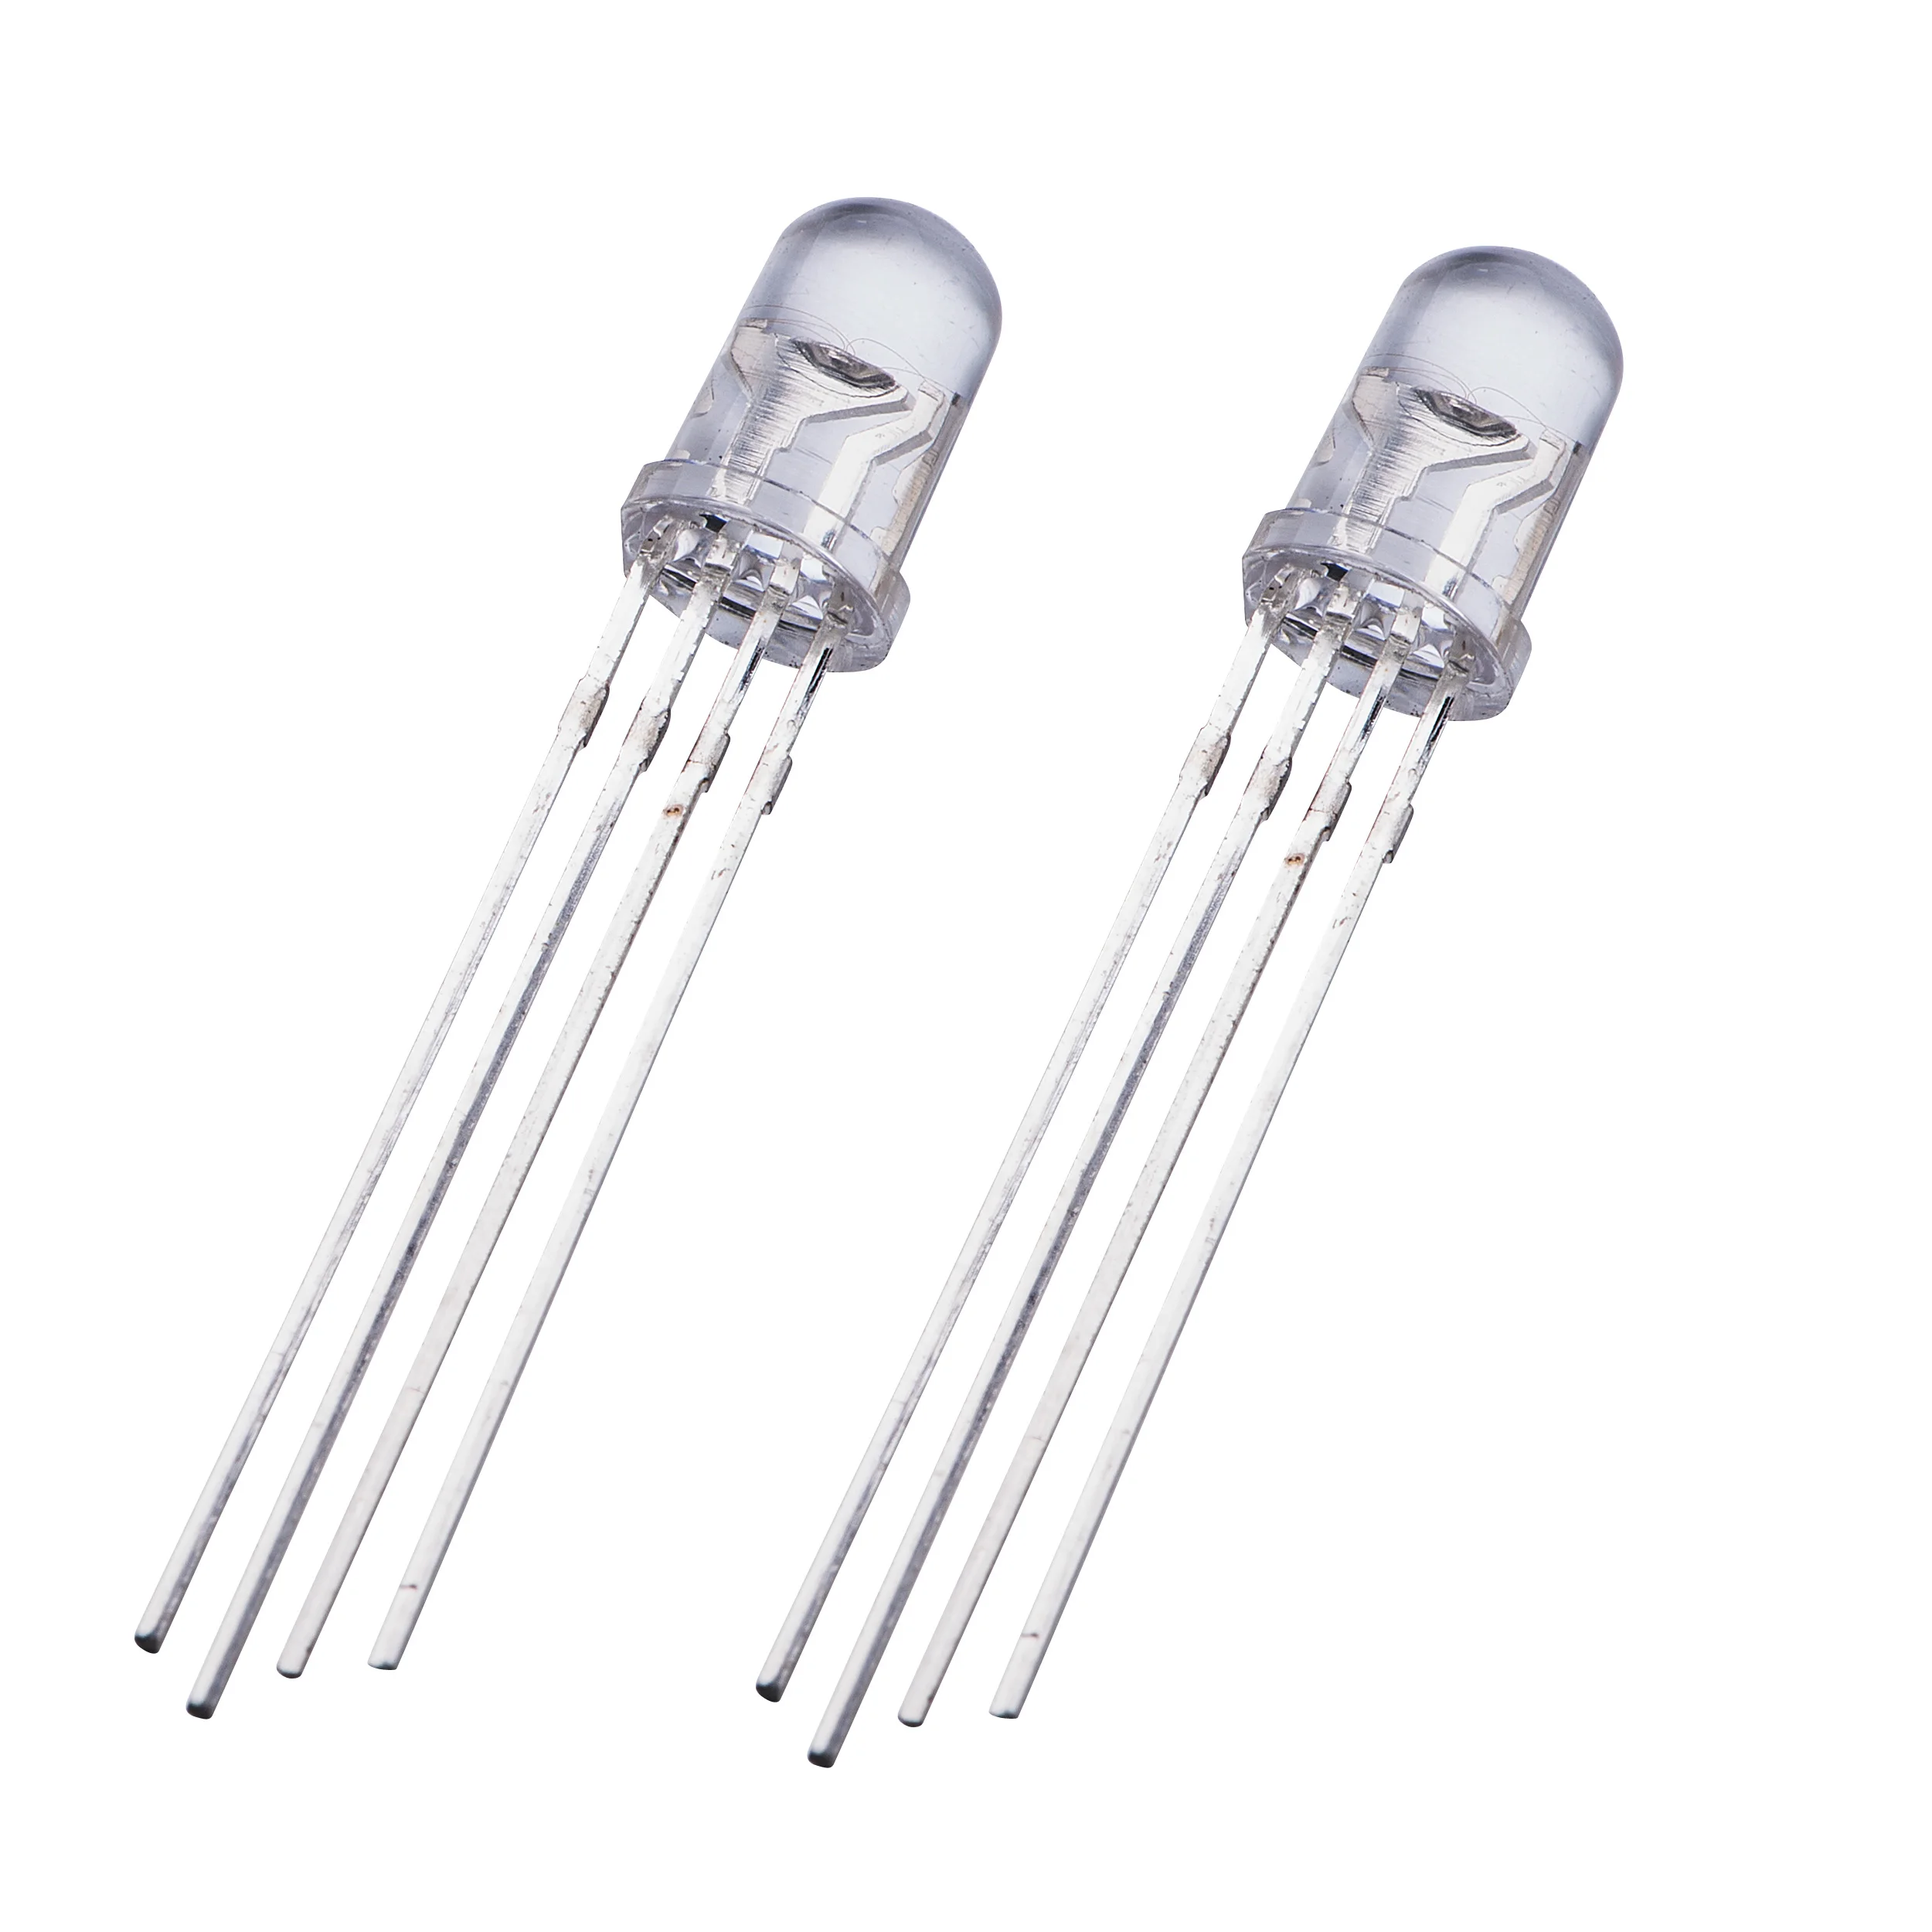 sessie Jonge dame Electrificeren Common Anode Common Cathode Tricolor Led 4-pin 5mm Diffused Rgb - Buy  Tricolor Led 4-pin 5mm Diffused Rgb,5mm Diffused Rgb,Tricolor 5mm Rgb Led  Product on Alibaba.com